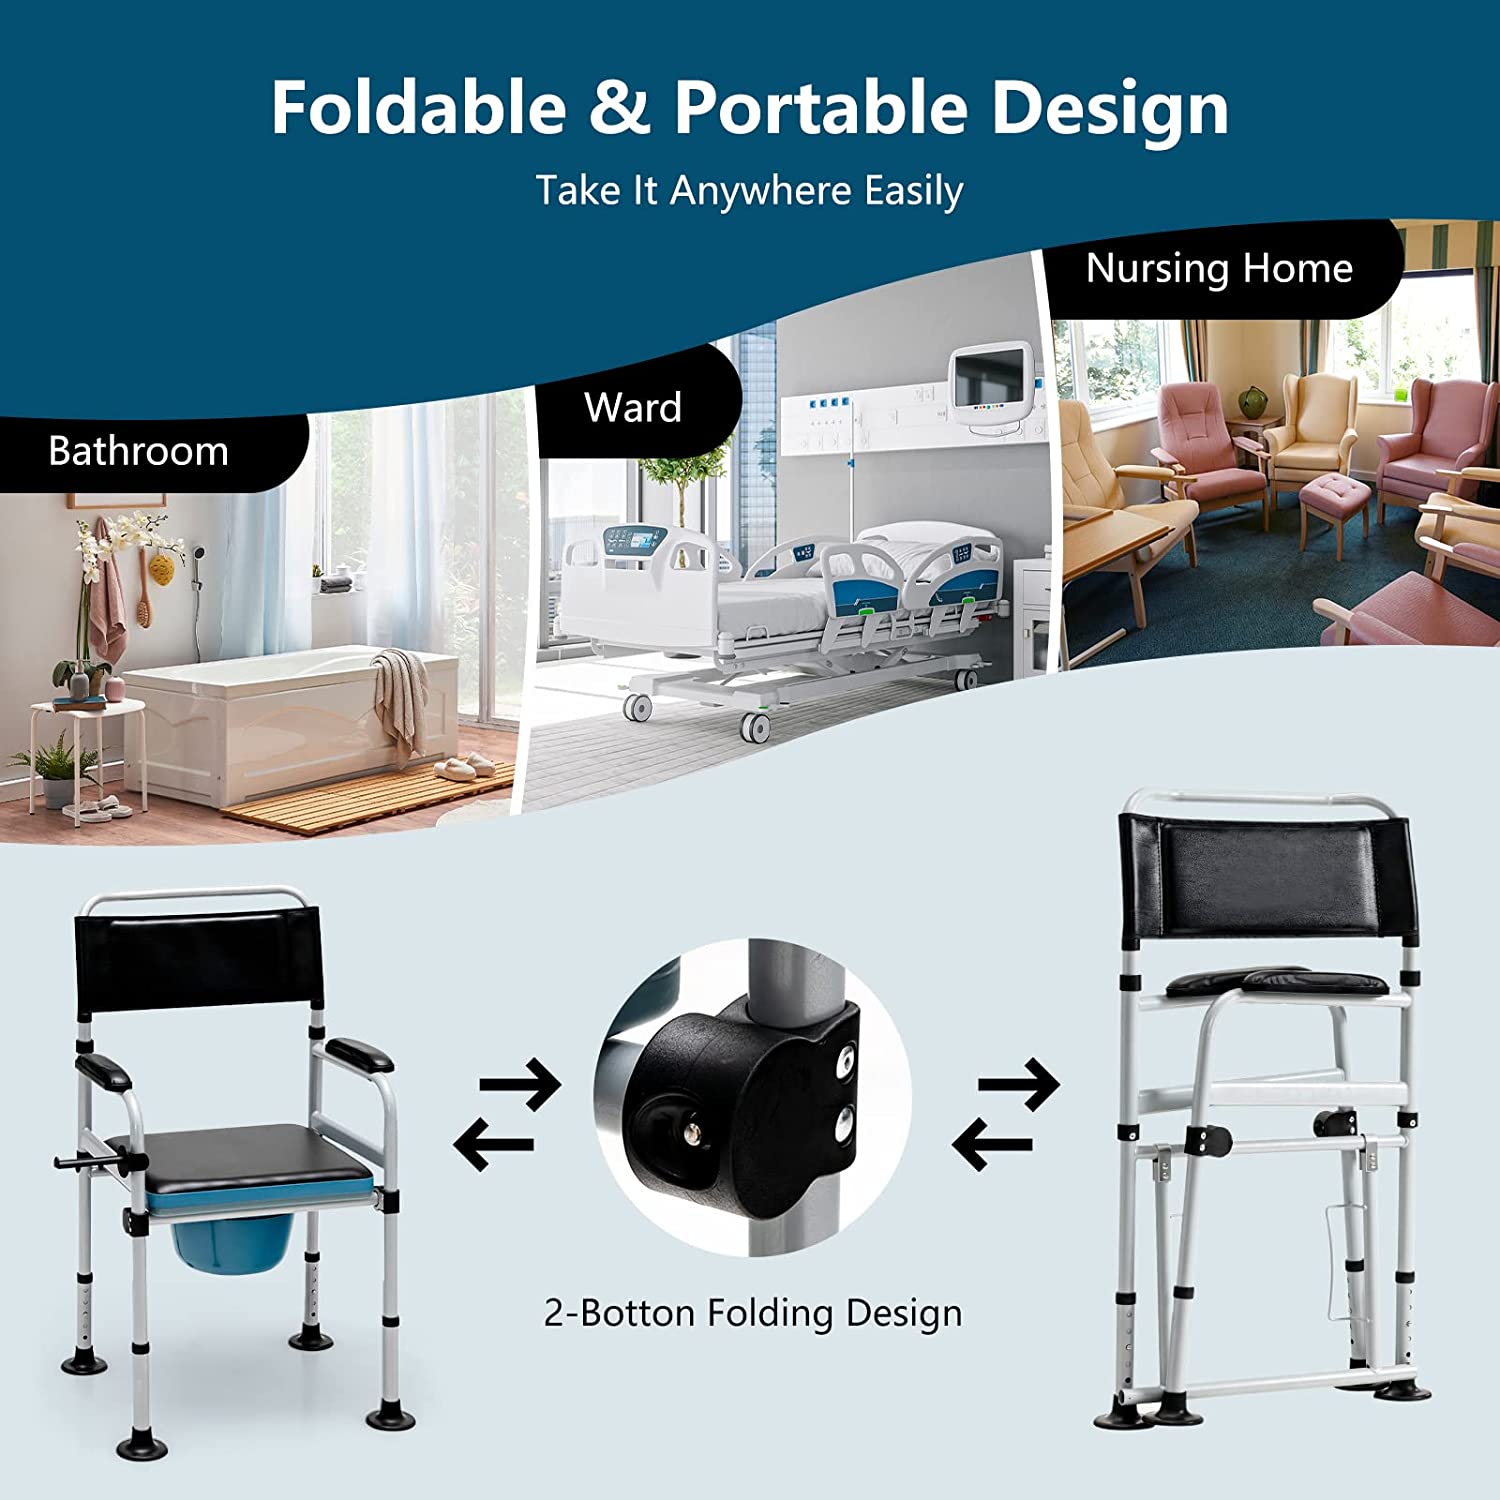 Chairliving 4-in-1 Folding Bedside Commode Chair 440lbs Height Adjustable Shower Chair Adult Potty Chair with Arms Padded Seat for Seniors